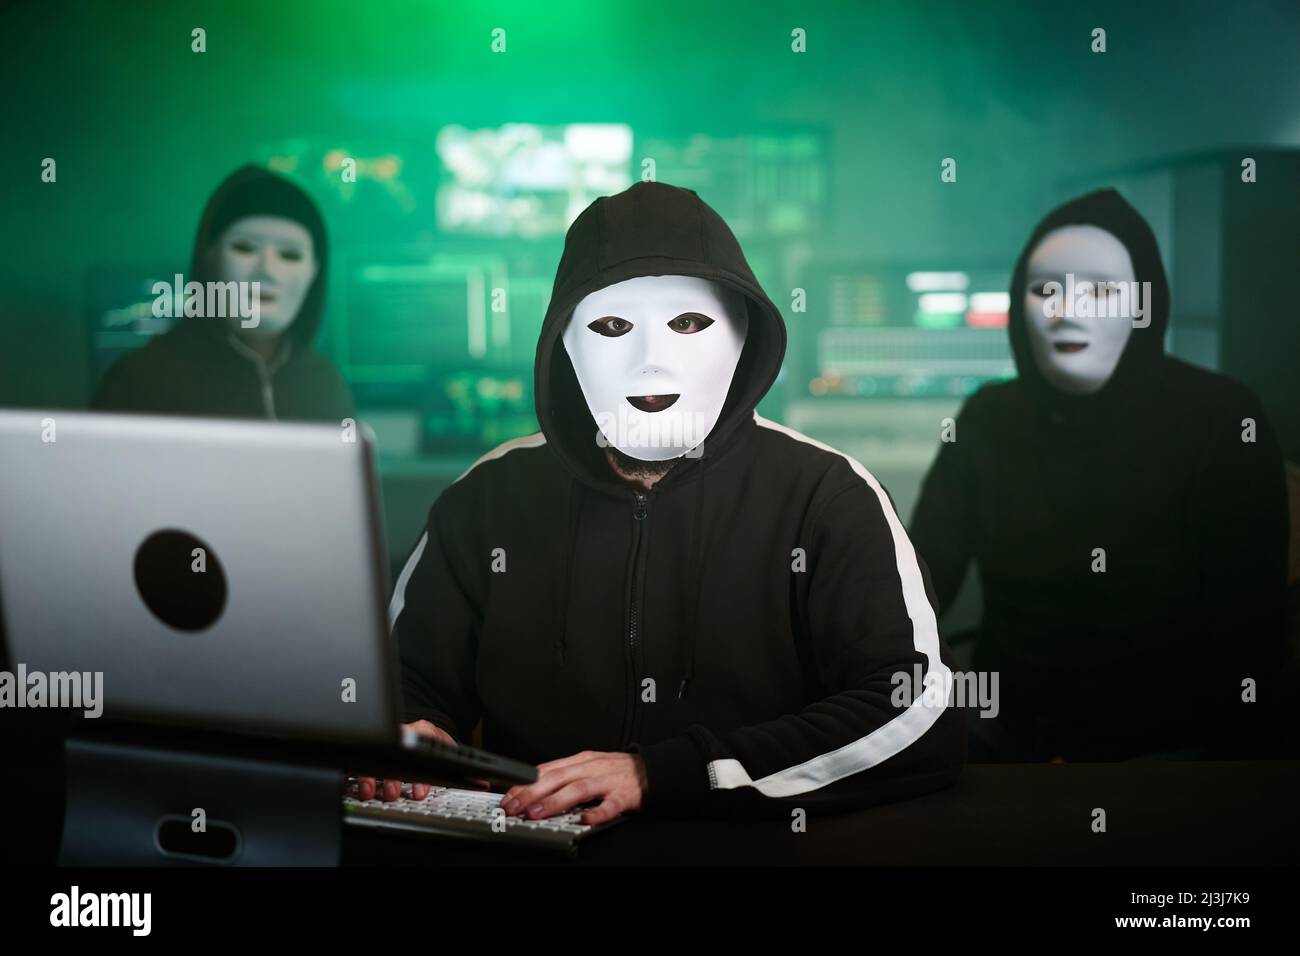 Masked Hacker is Using Computer for Organizing Massive Data Breach Attack on Corporate Servers. They're in Underground Secret Location Surrounded by Stock Photo